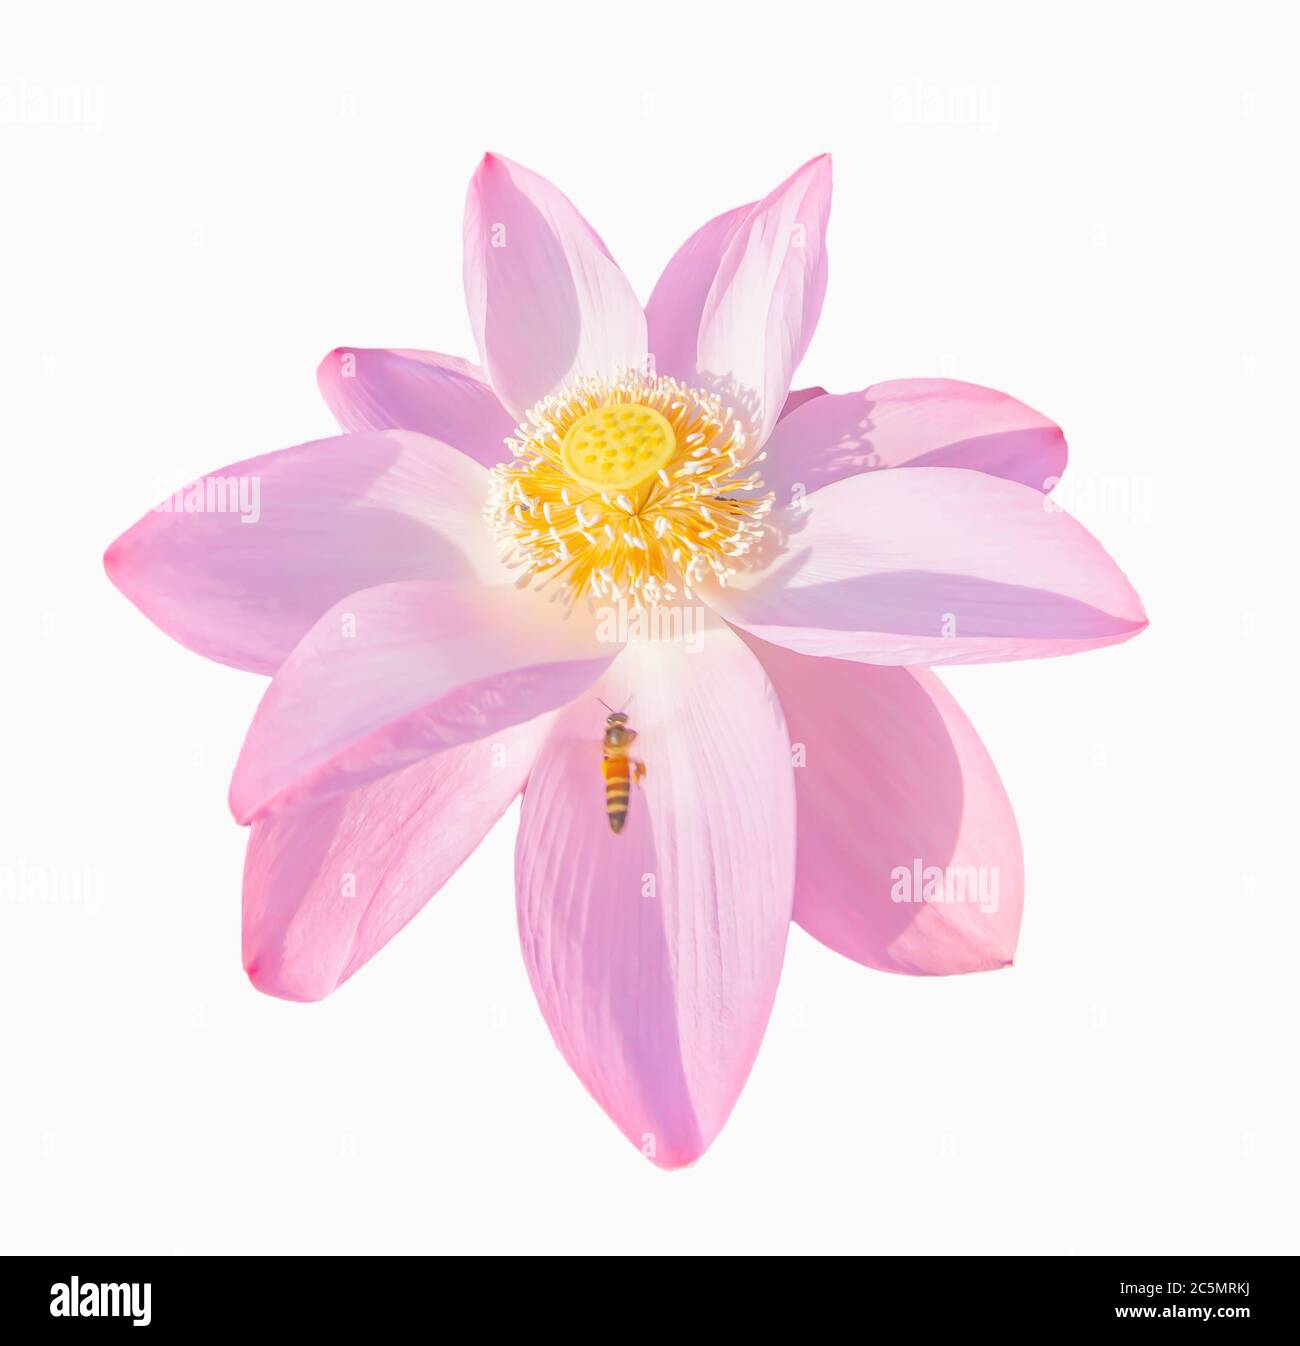 Motion blur, Asian honeybee collecting pollen from pink Lotus blossom, isolated on white background with clipping path. Close-up. Top view. Stock Photo